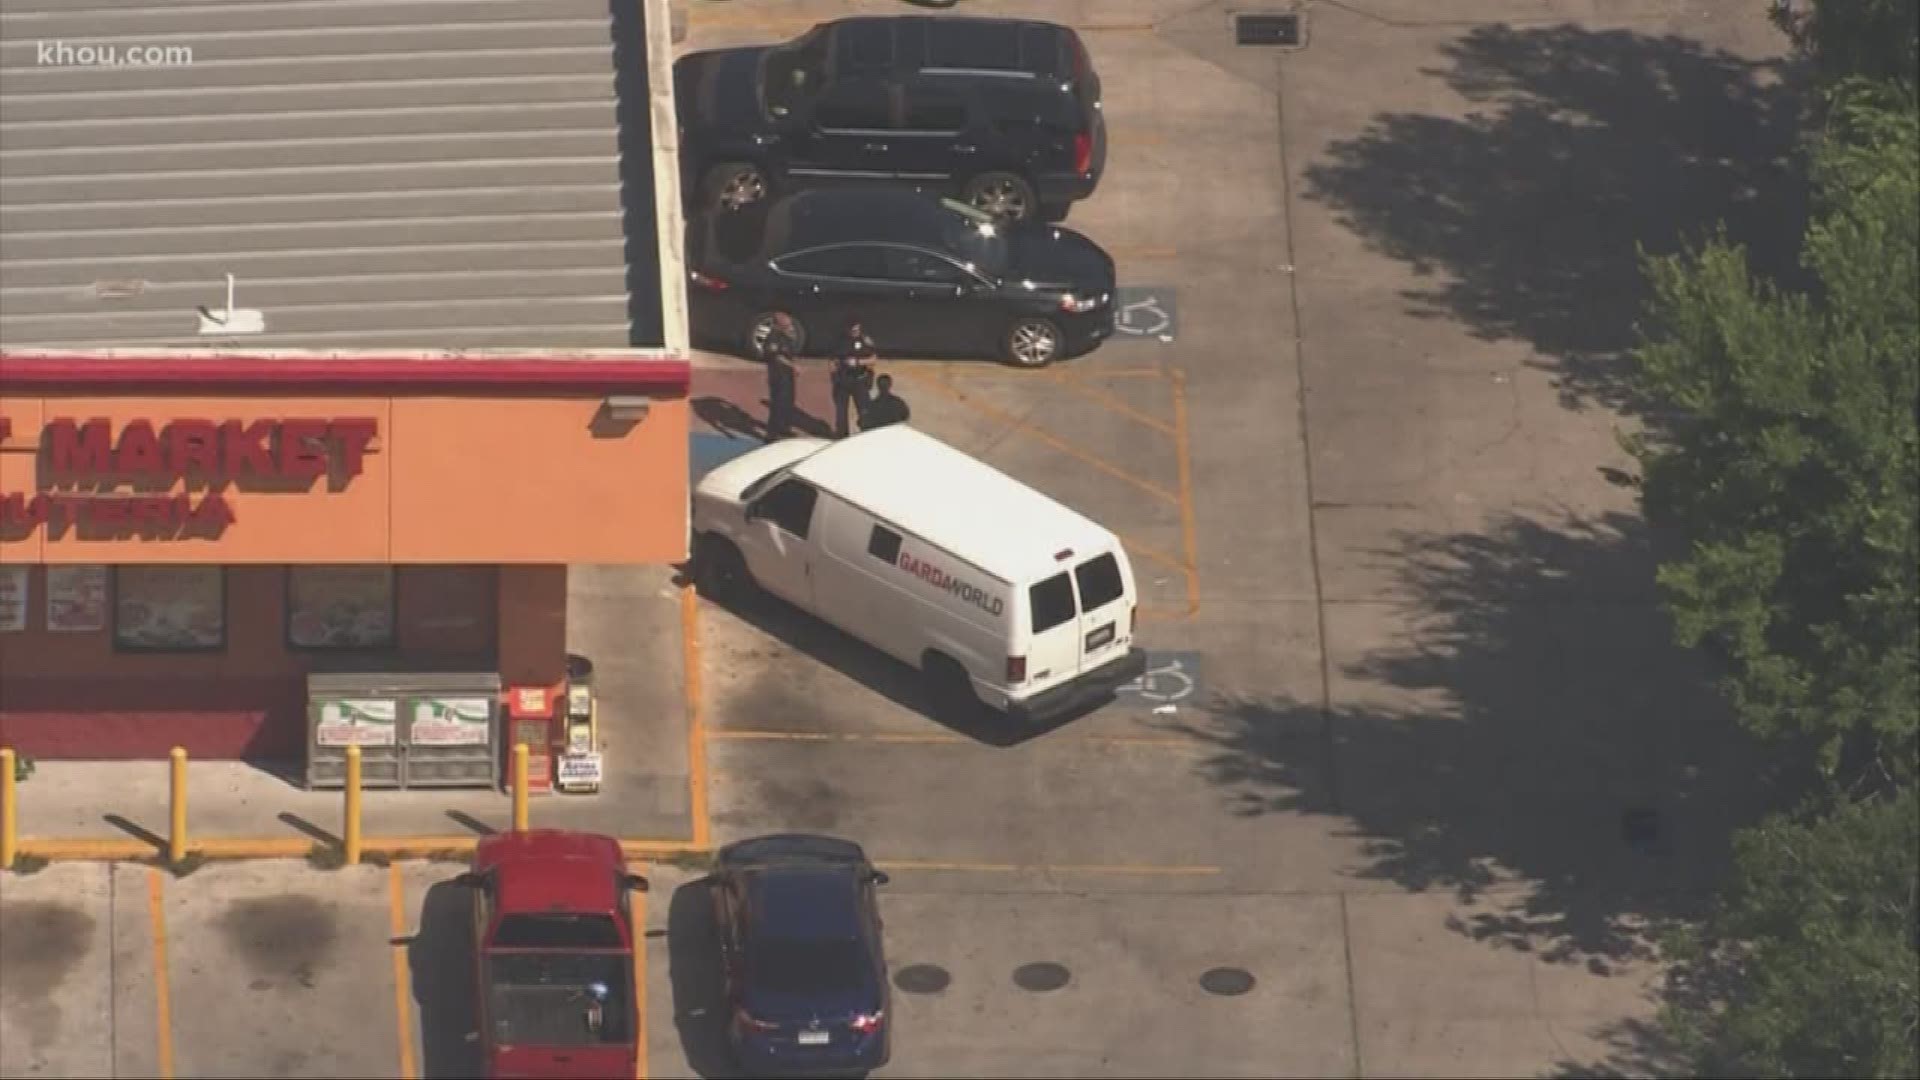 Deputies are looking for a suspect in an armored car robbery who used pepper spray on the victim before stealing cash, according to the Harris County Sheriff's Office.